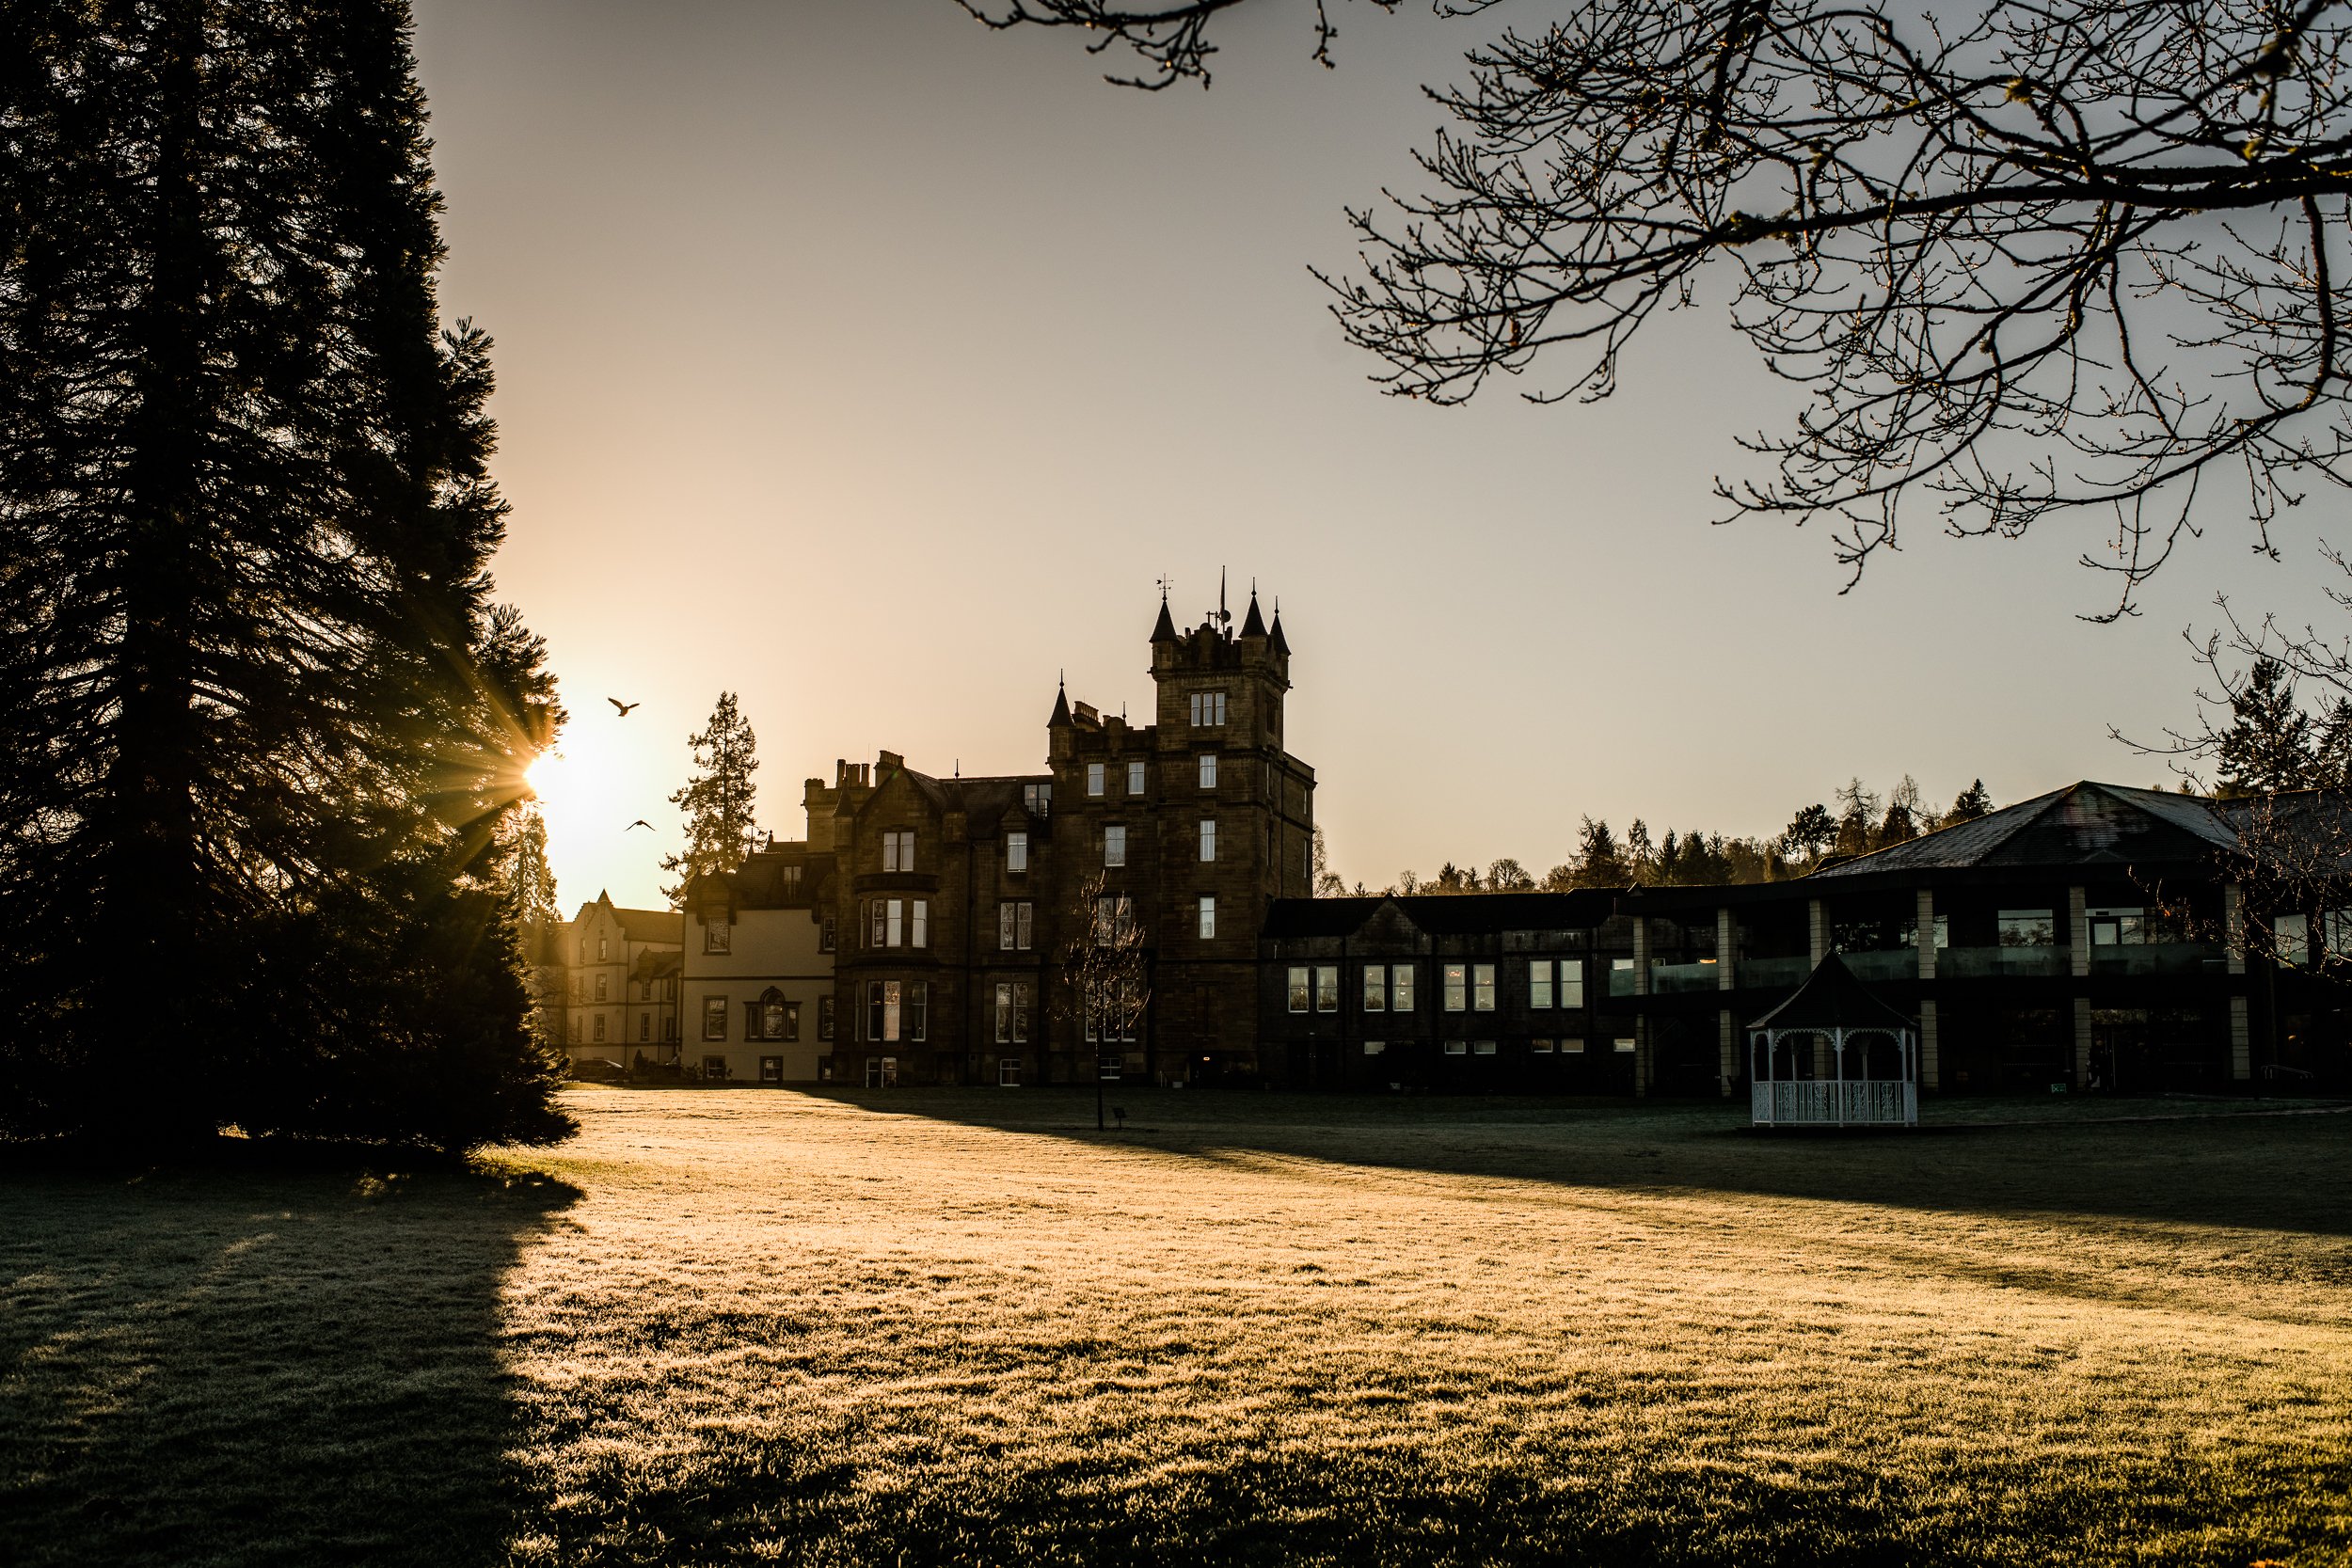 Cameron House in Winter Light